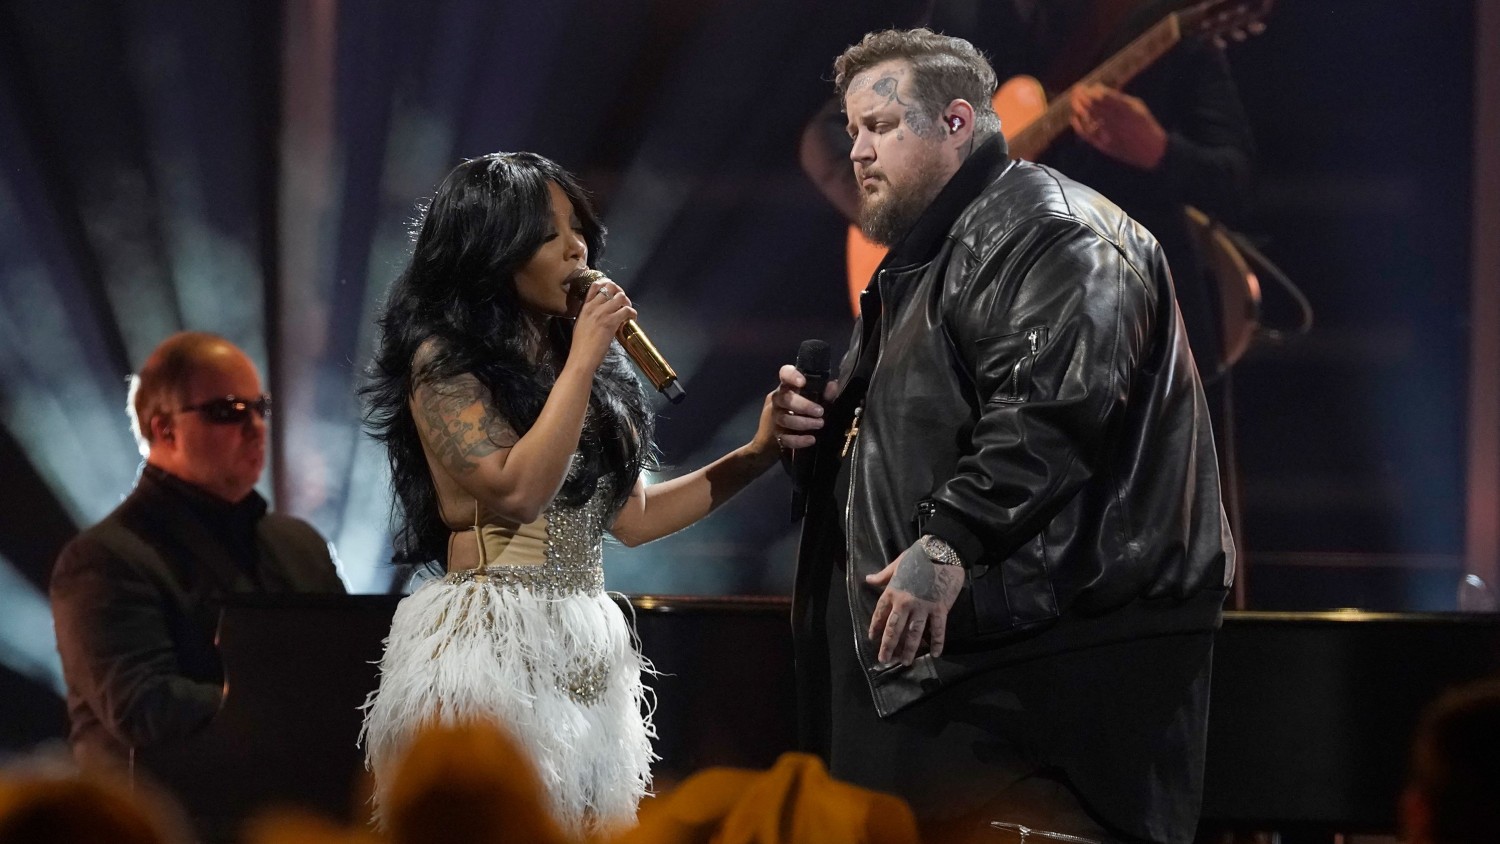 K. Michelle, left, and Jelly Roll perform "Love Can Build a Bridge" at the 57th Annual CMA Awards on Wednesday. George Walker IV/Invision/AP